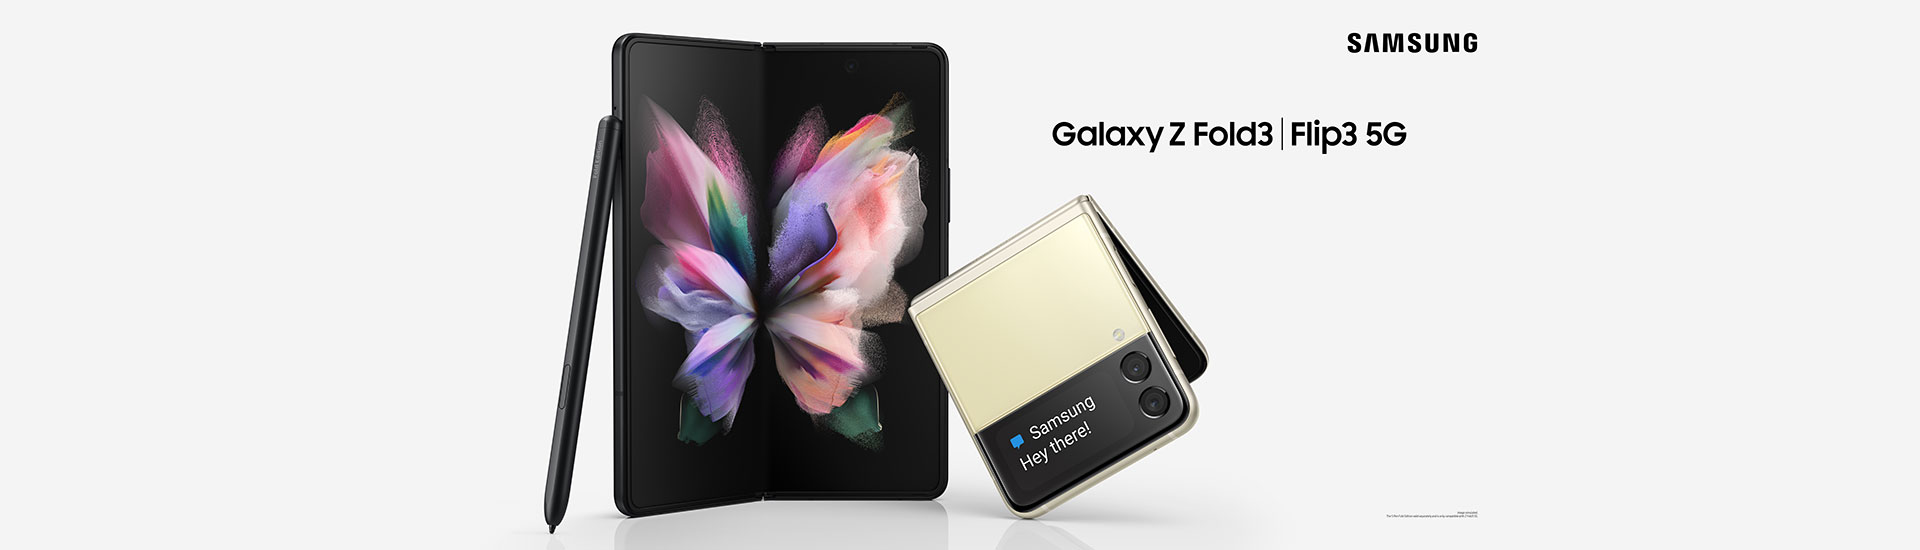 Galaxy Z Fold3 5G enjoy to free premiums (Total value $2,196). Galaxy Z Flip3 5G enjoy to free Silicone Cover with Strap (value $398). Up to $1,600 Standalone Discount upon 5G SIM Subscription / contract renewal.